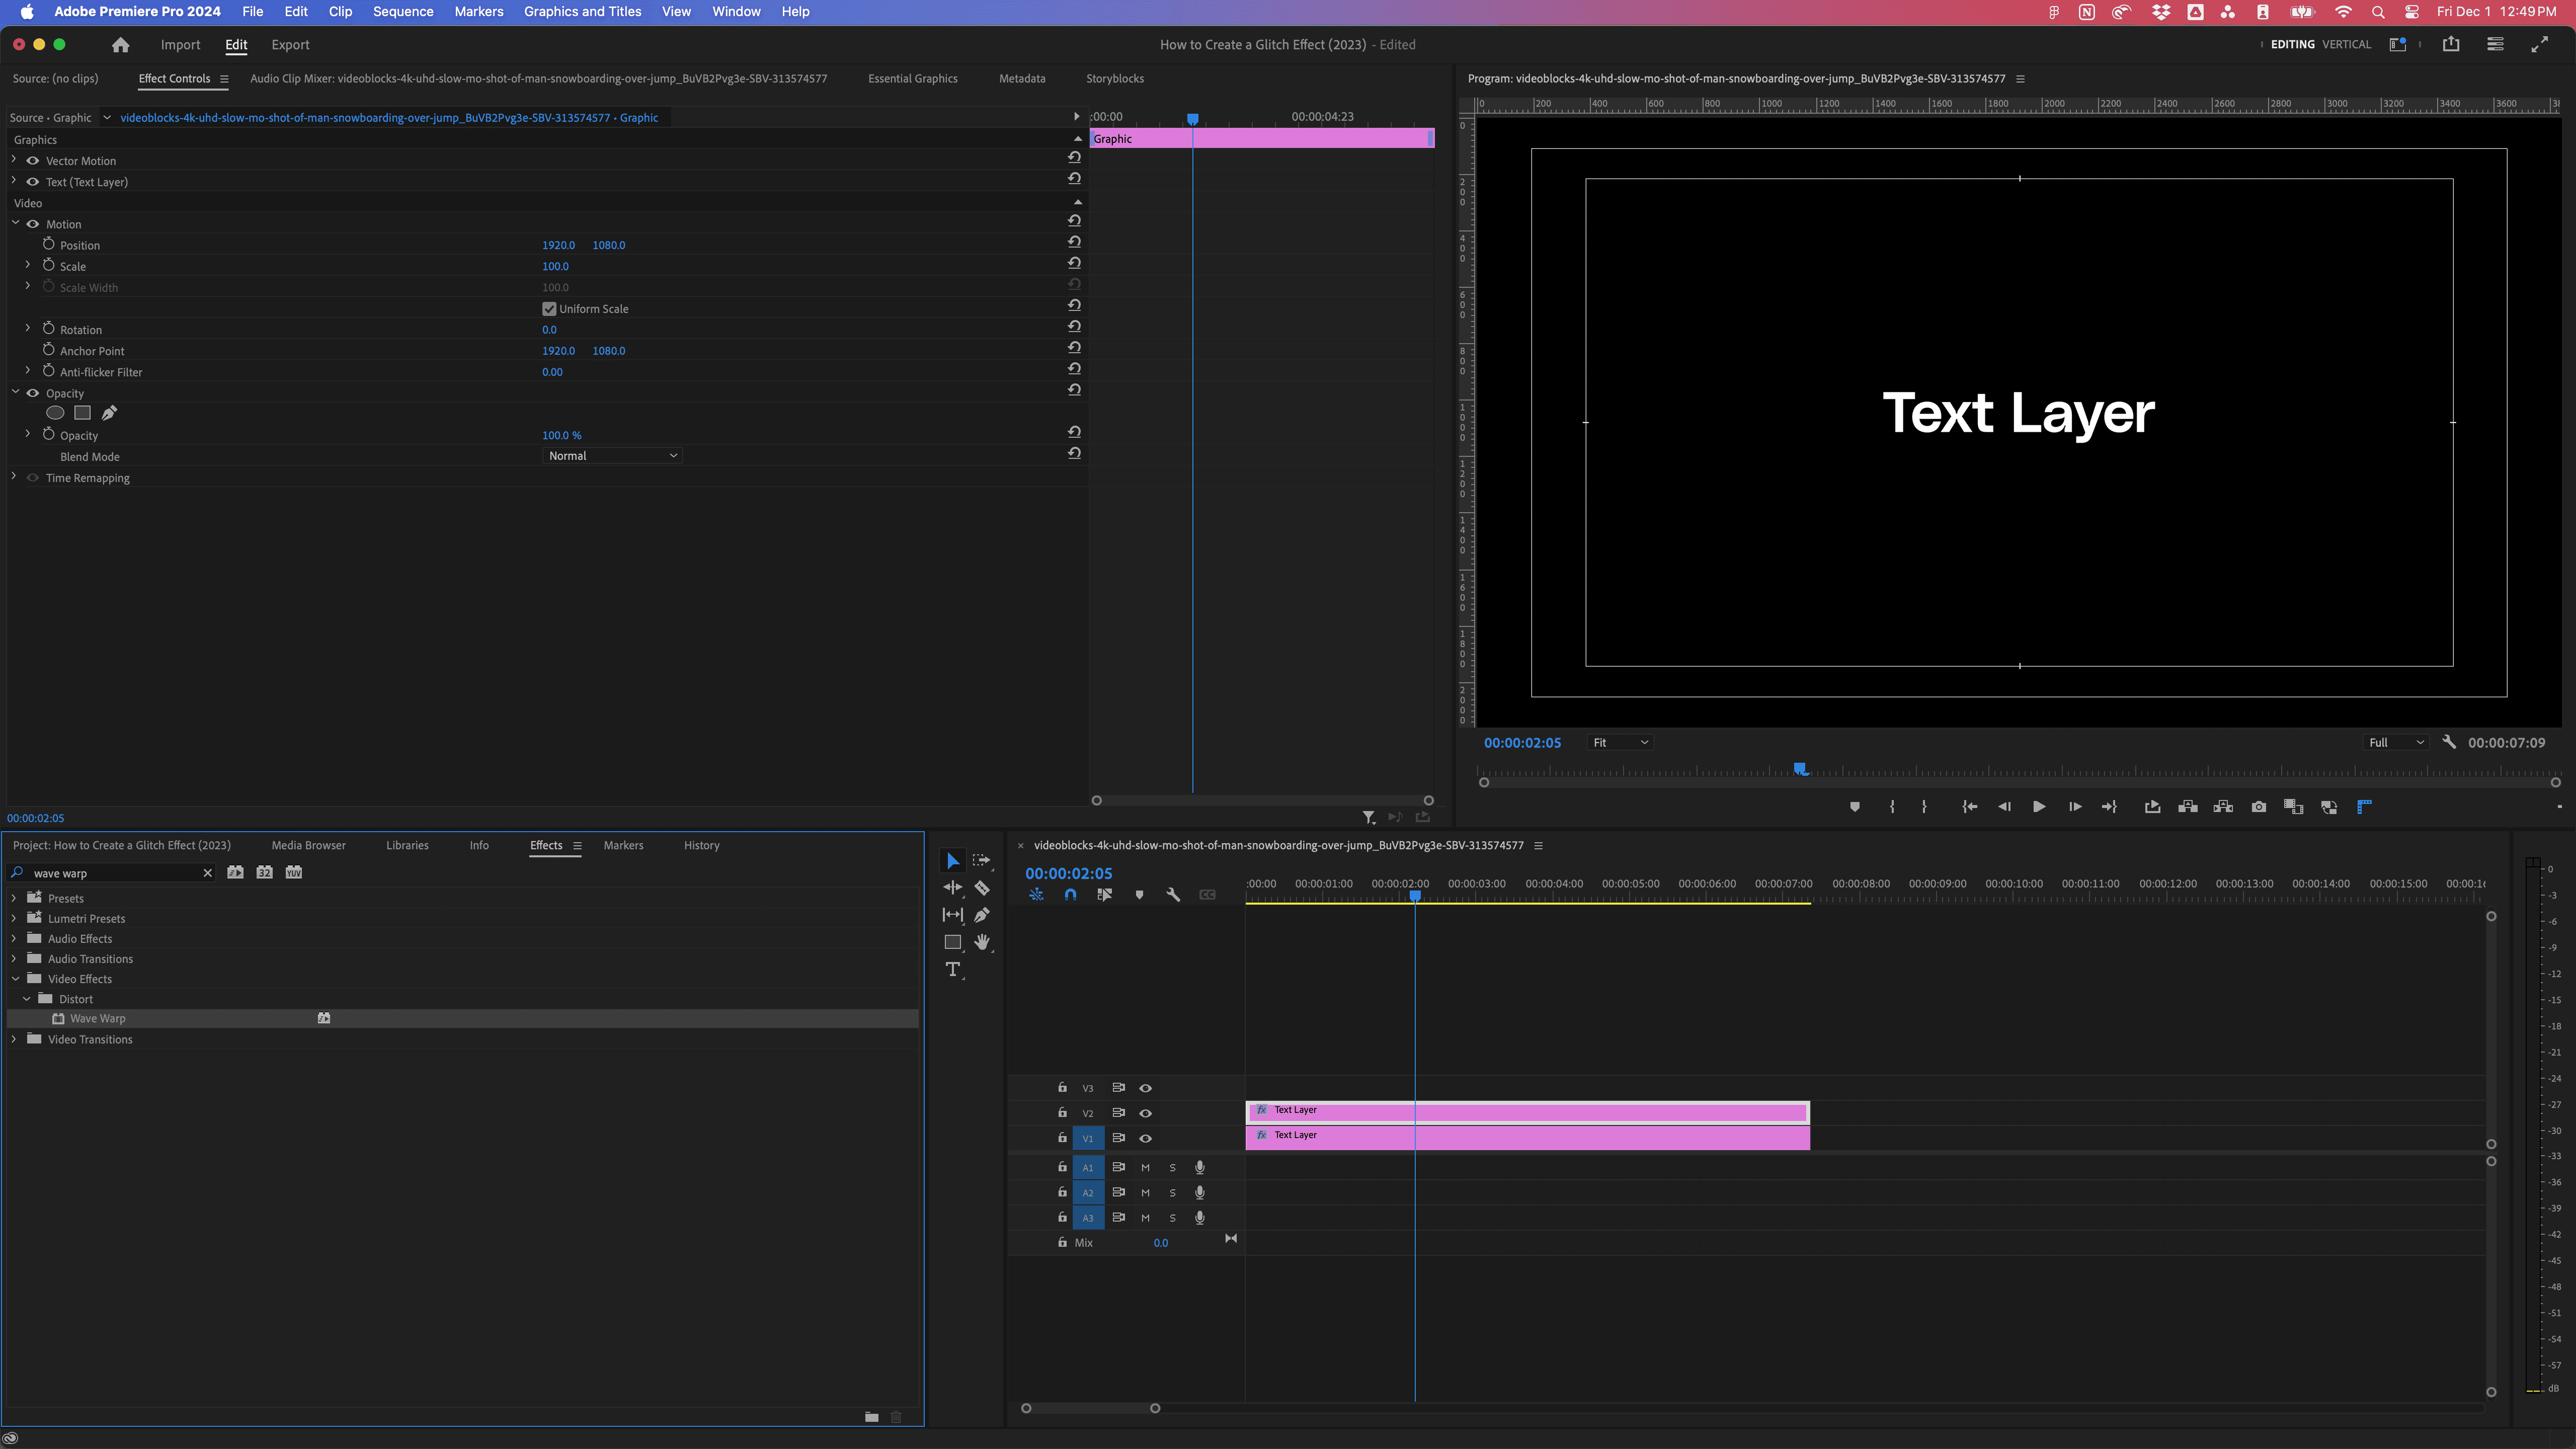 Step 2 of adding a glitch effect to text - create a copy of your text layer.